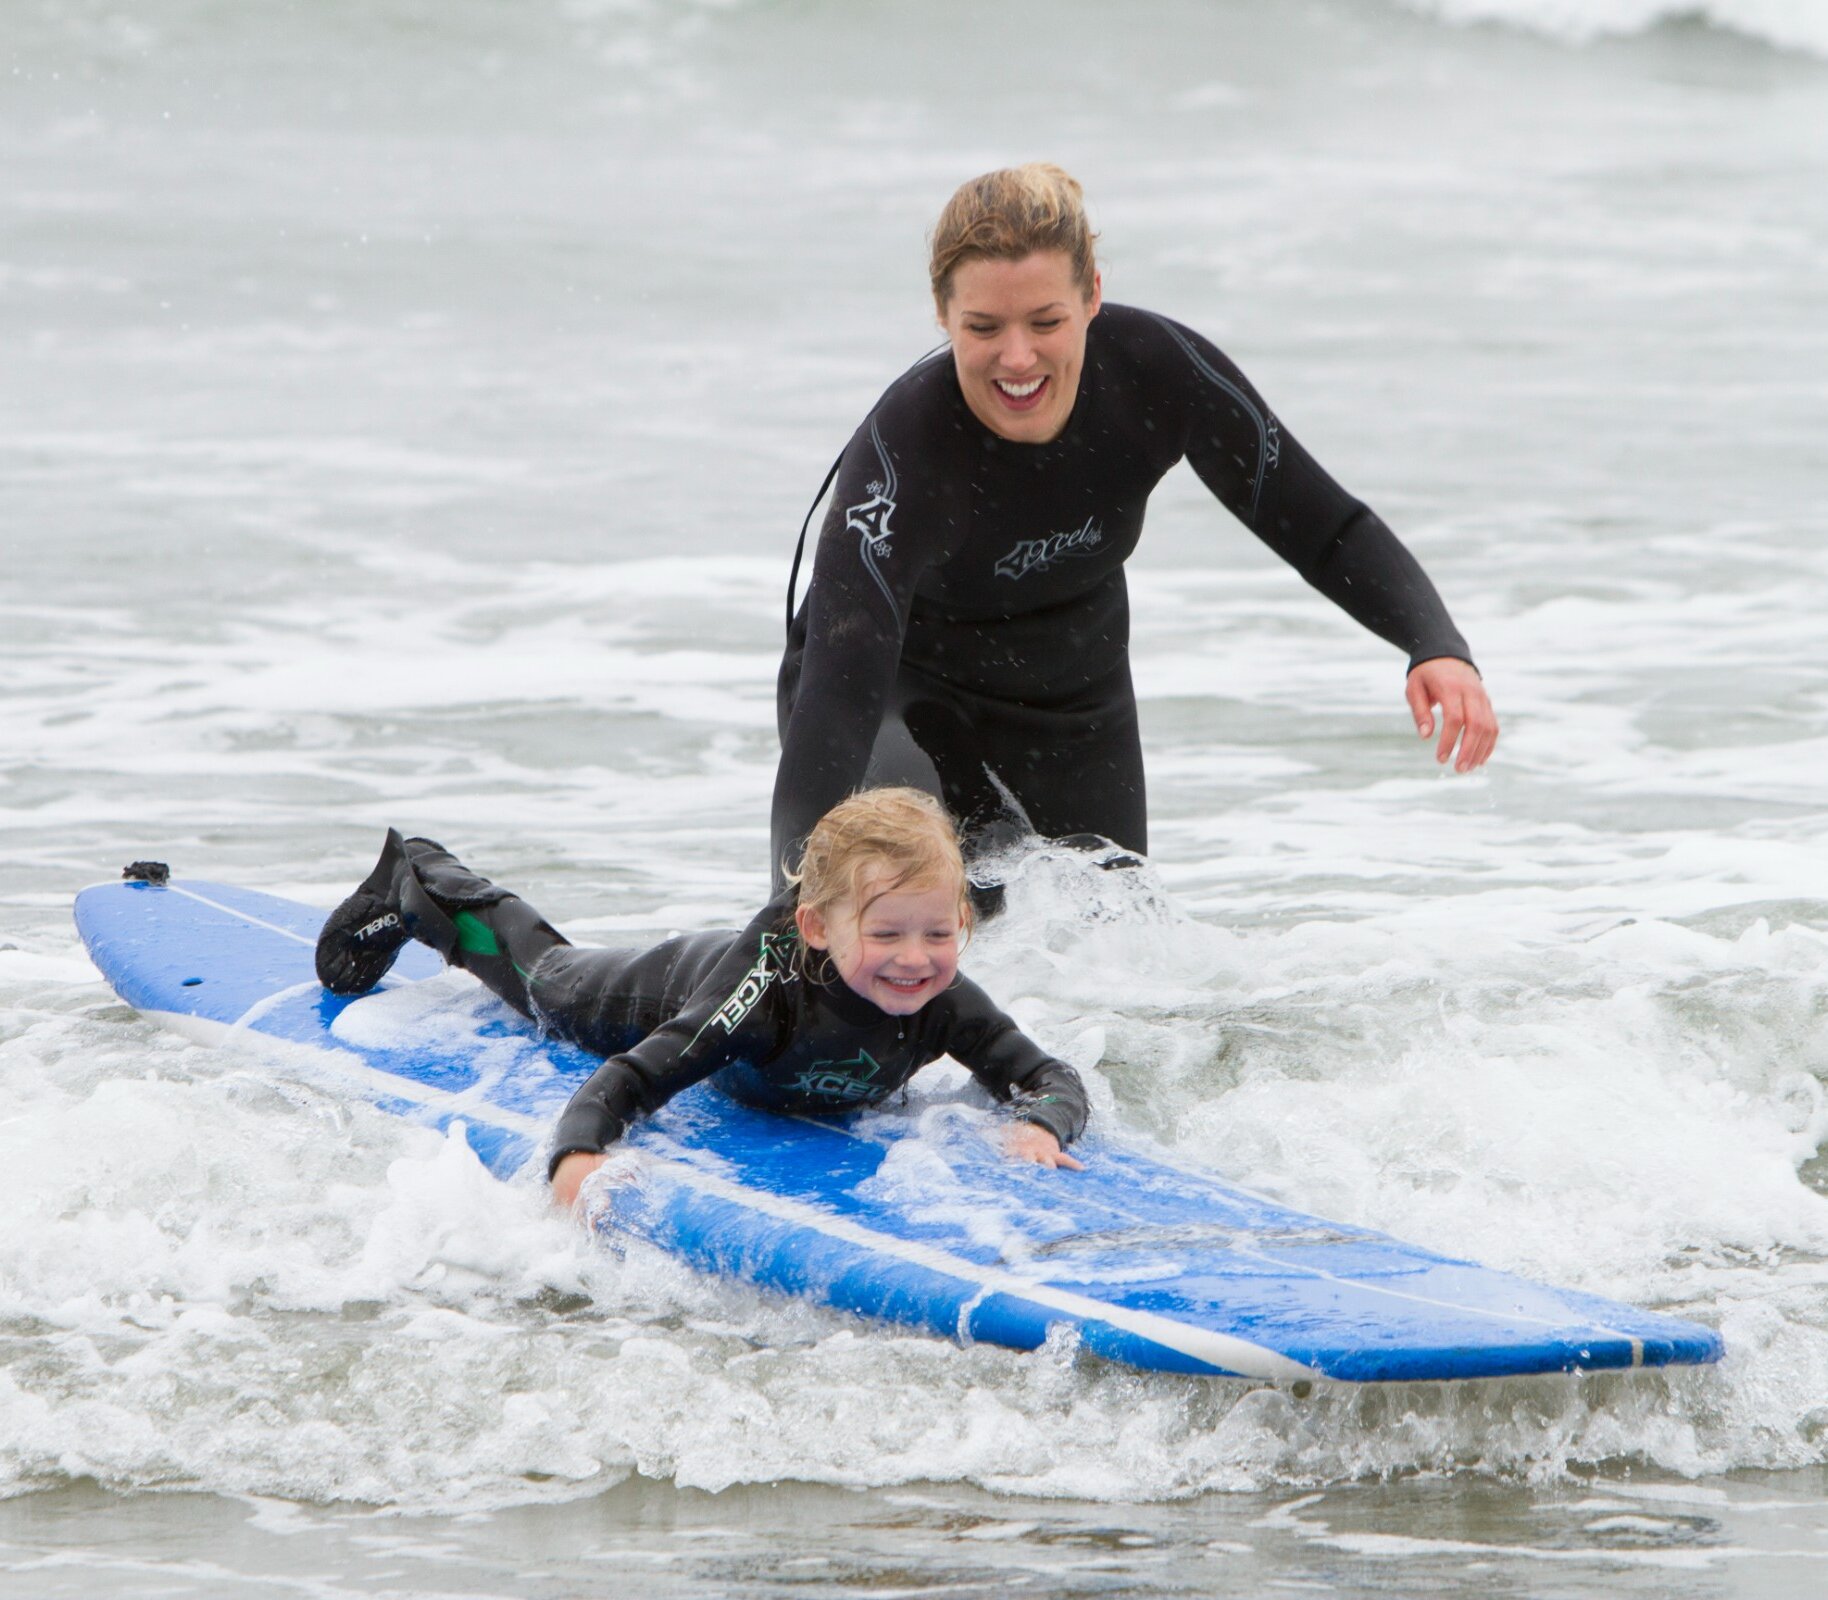 Small child laying down on a board riding a small wave with their parent holding onto the board